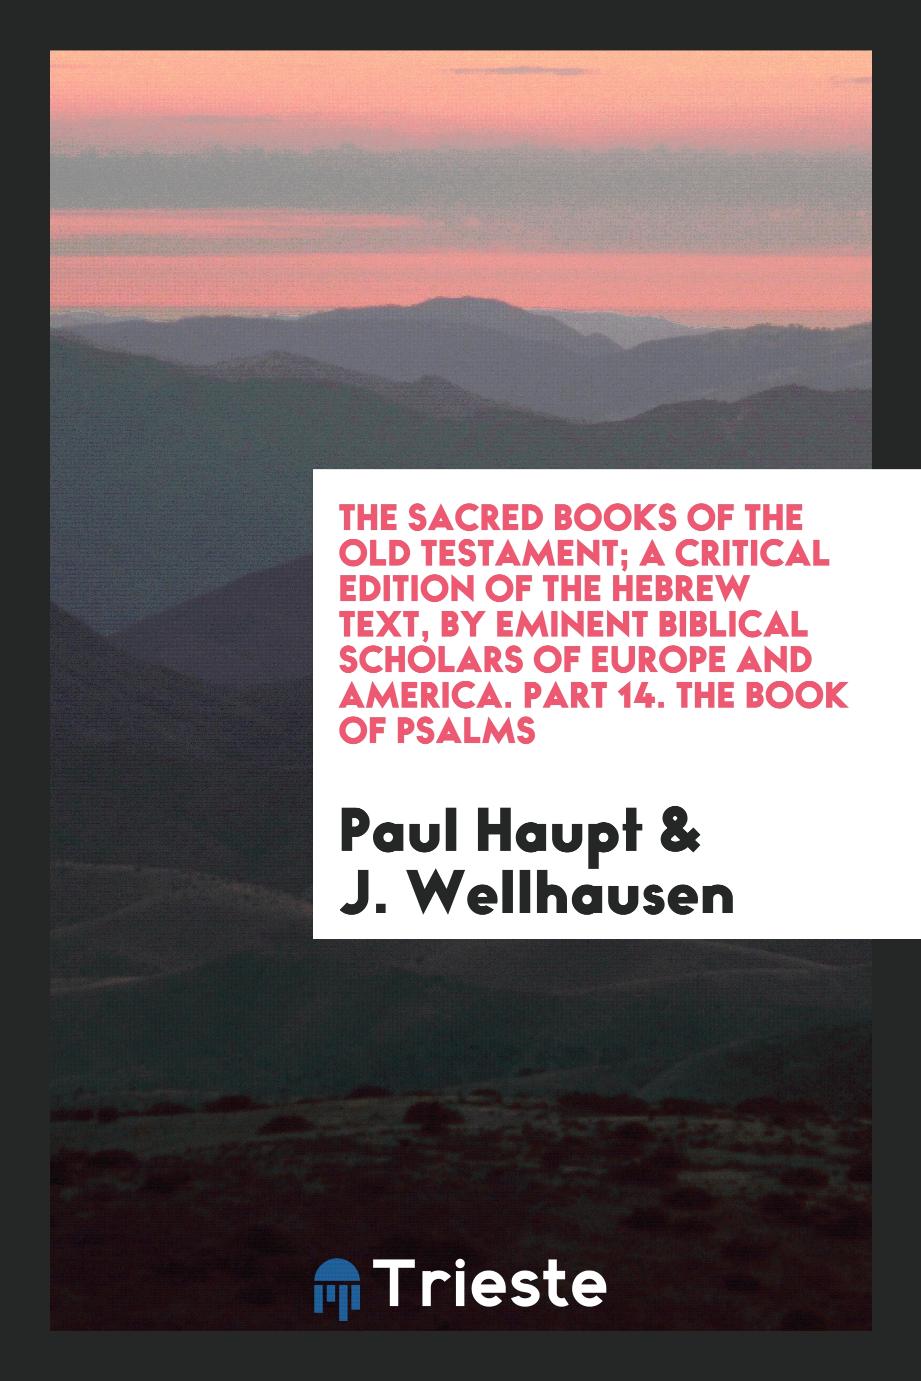 The Sacred Books of the Old Testament; A Critical Edition of the Hebrew Text, by Eminent Biblical Scholars of Europe and America. Part 14. The Book of Psalms